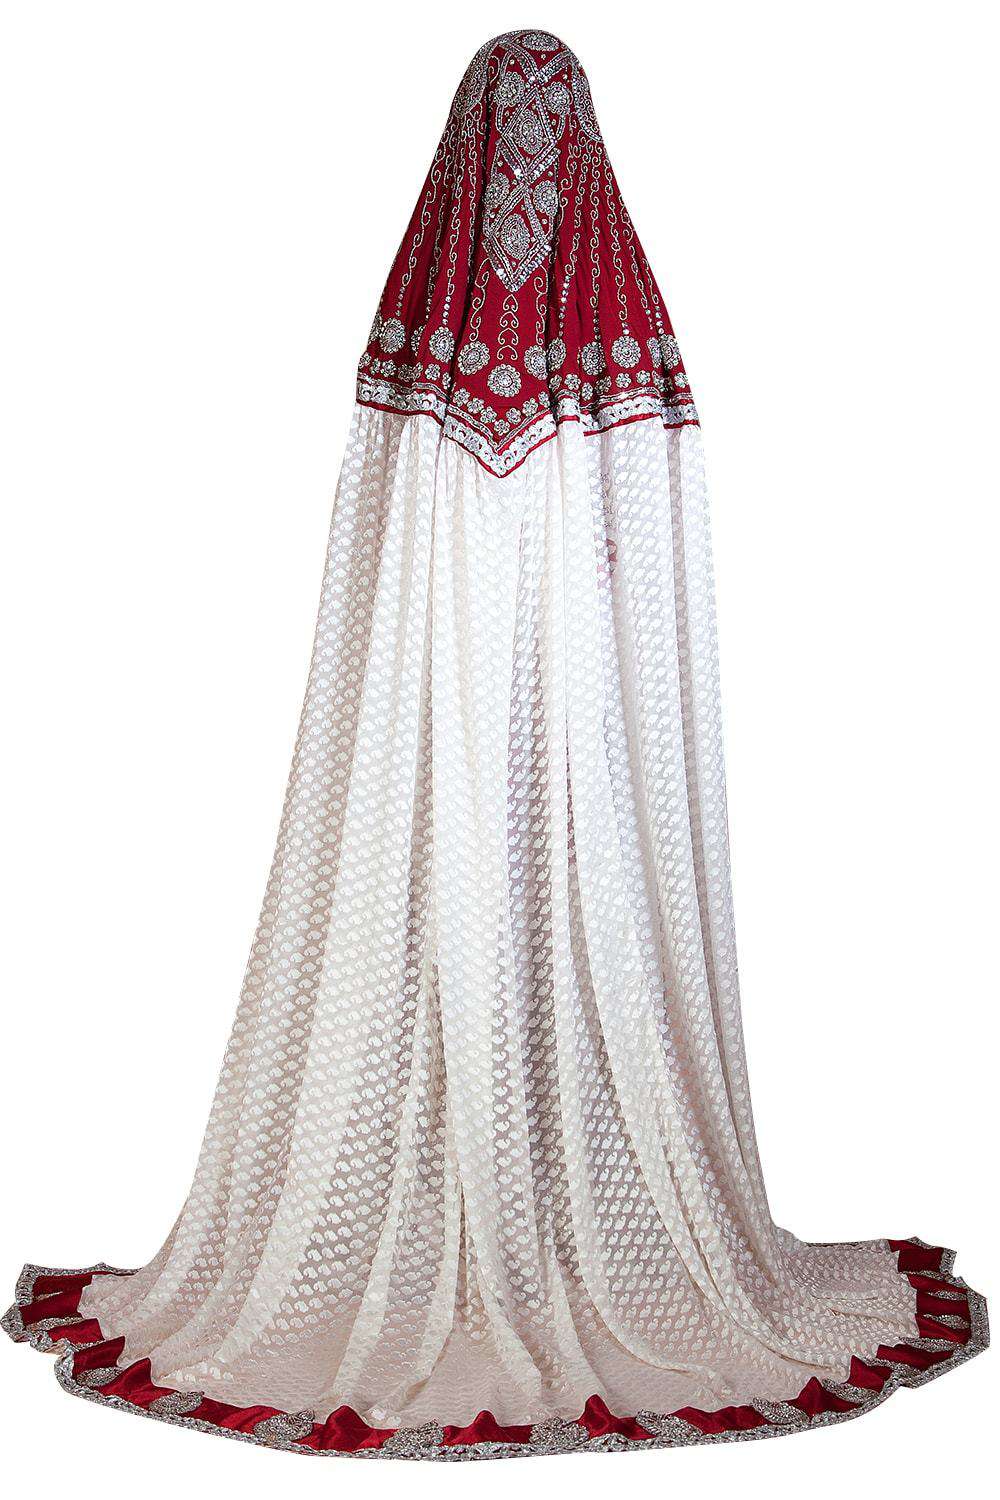 Off White and Maroon Color Embroidered & Handmade Wedding Dress Long Sleeve Moroccan Kaftan